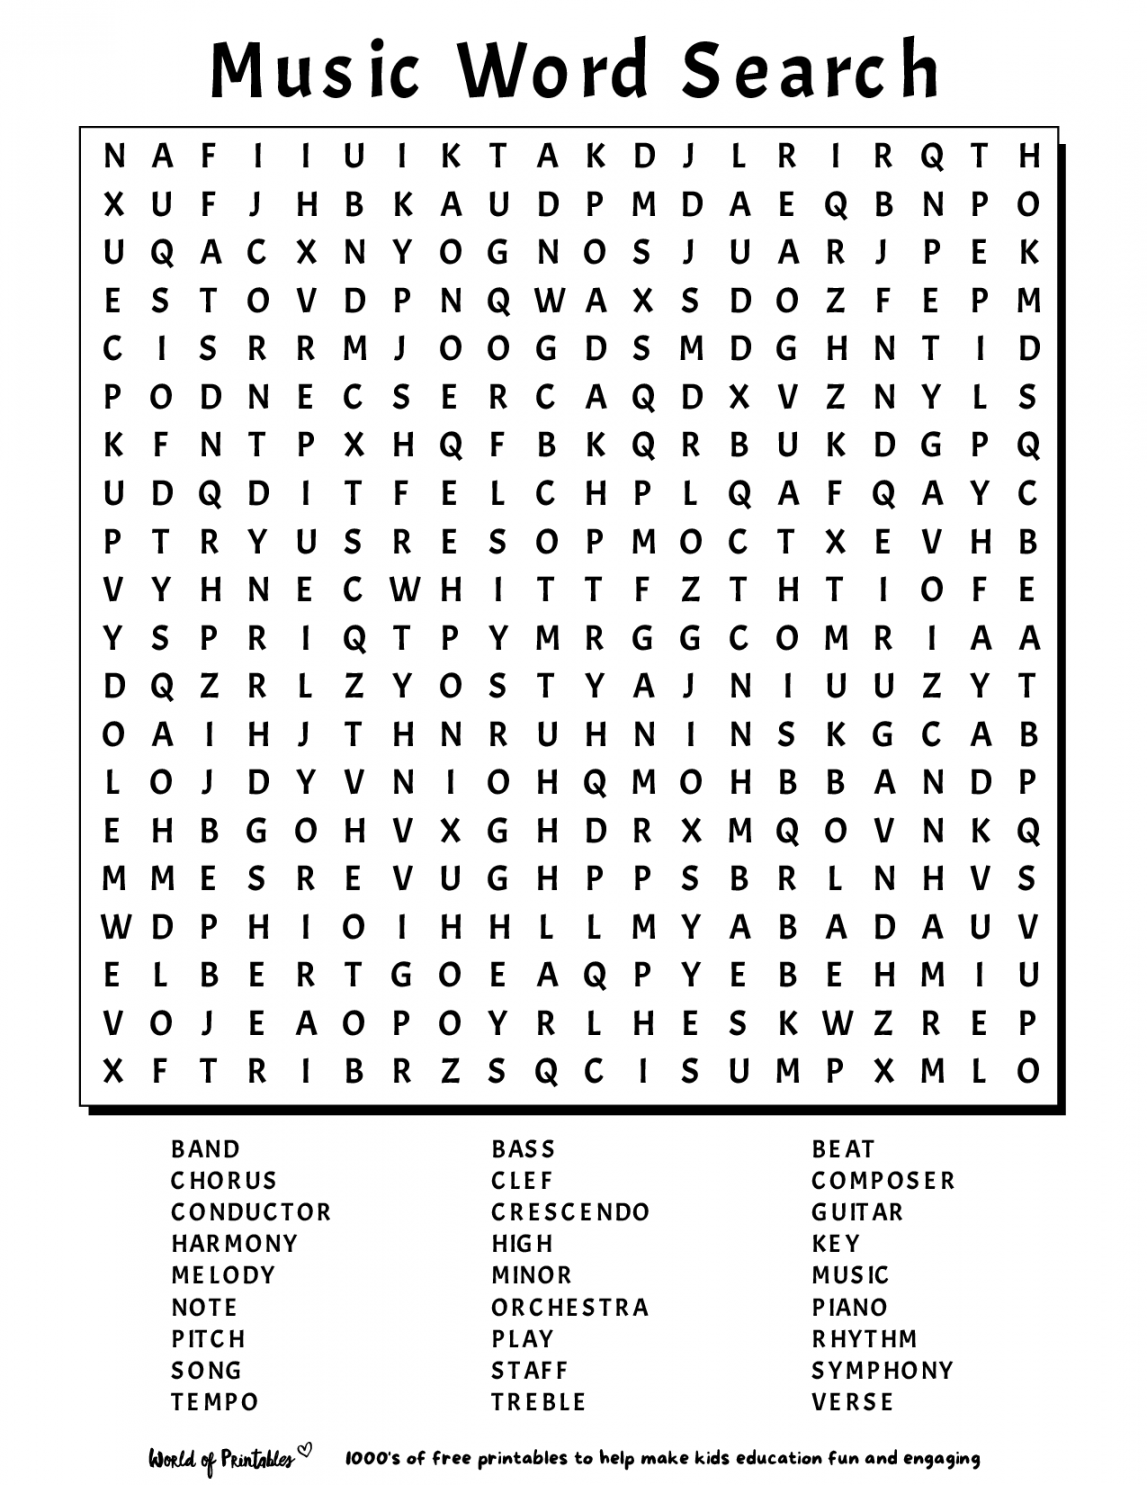 Word Search Puzzles Free Printable - Printable - Printable Word Search  World of Printables